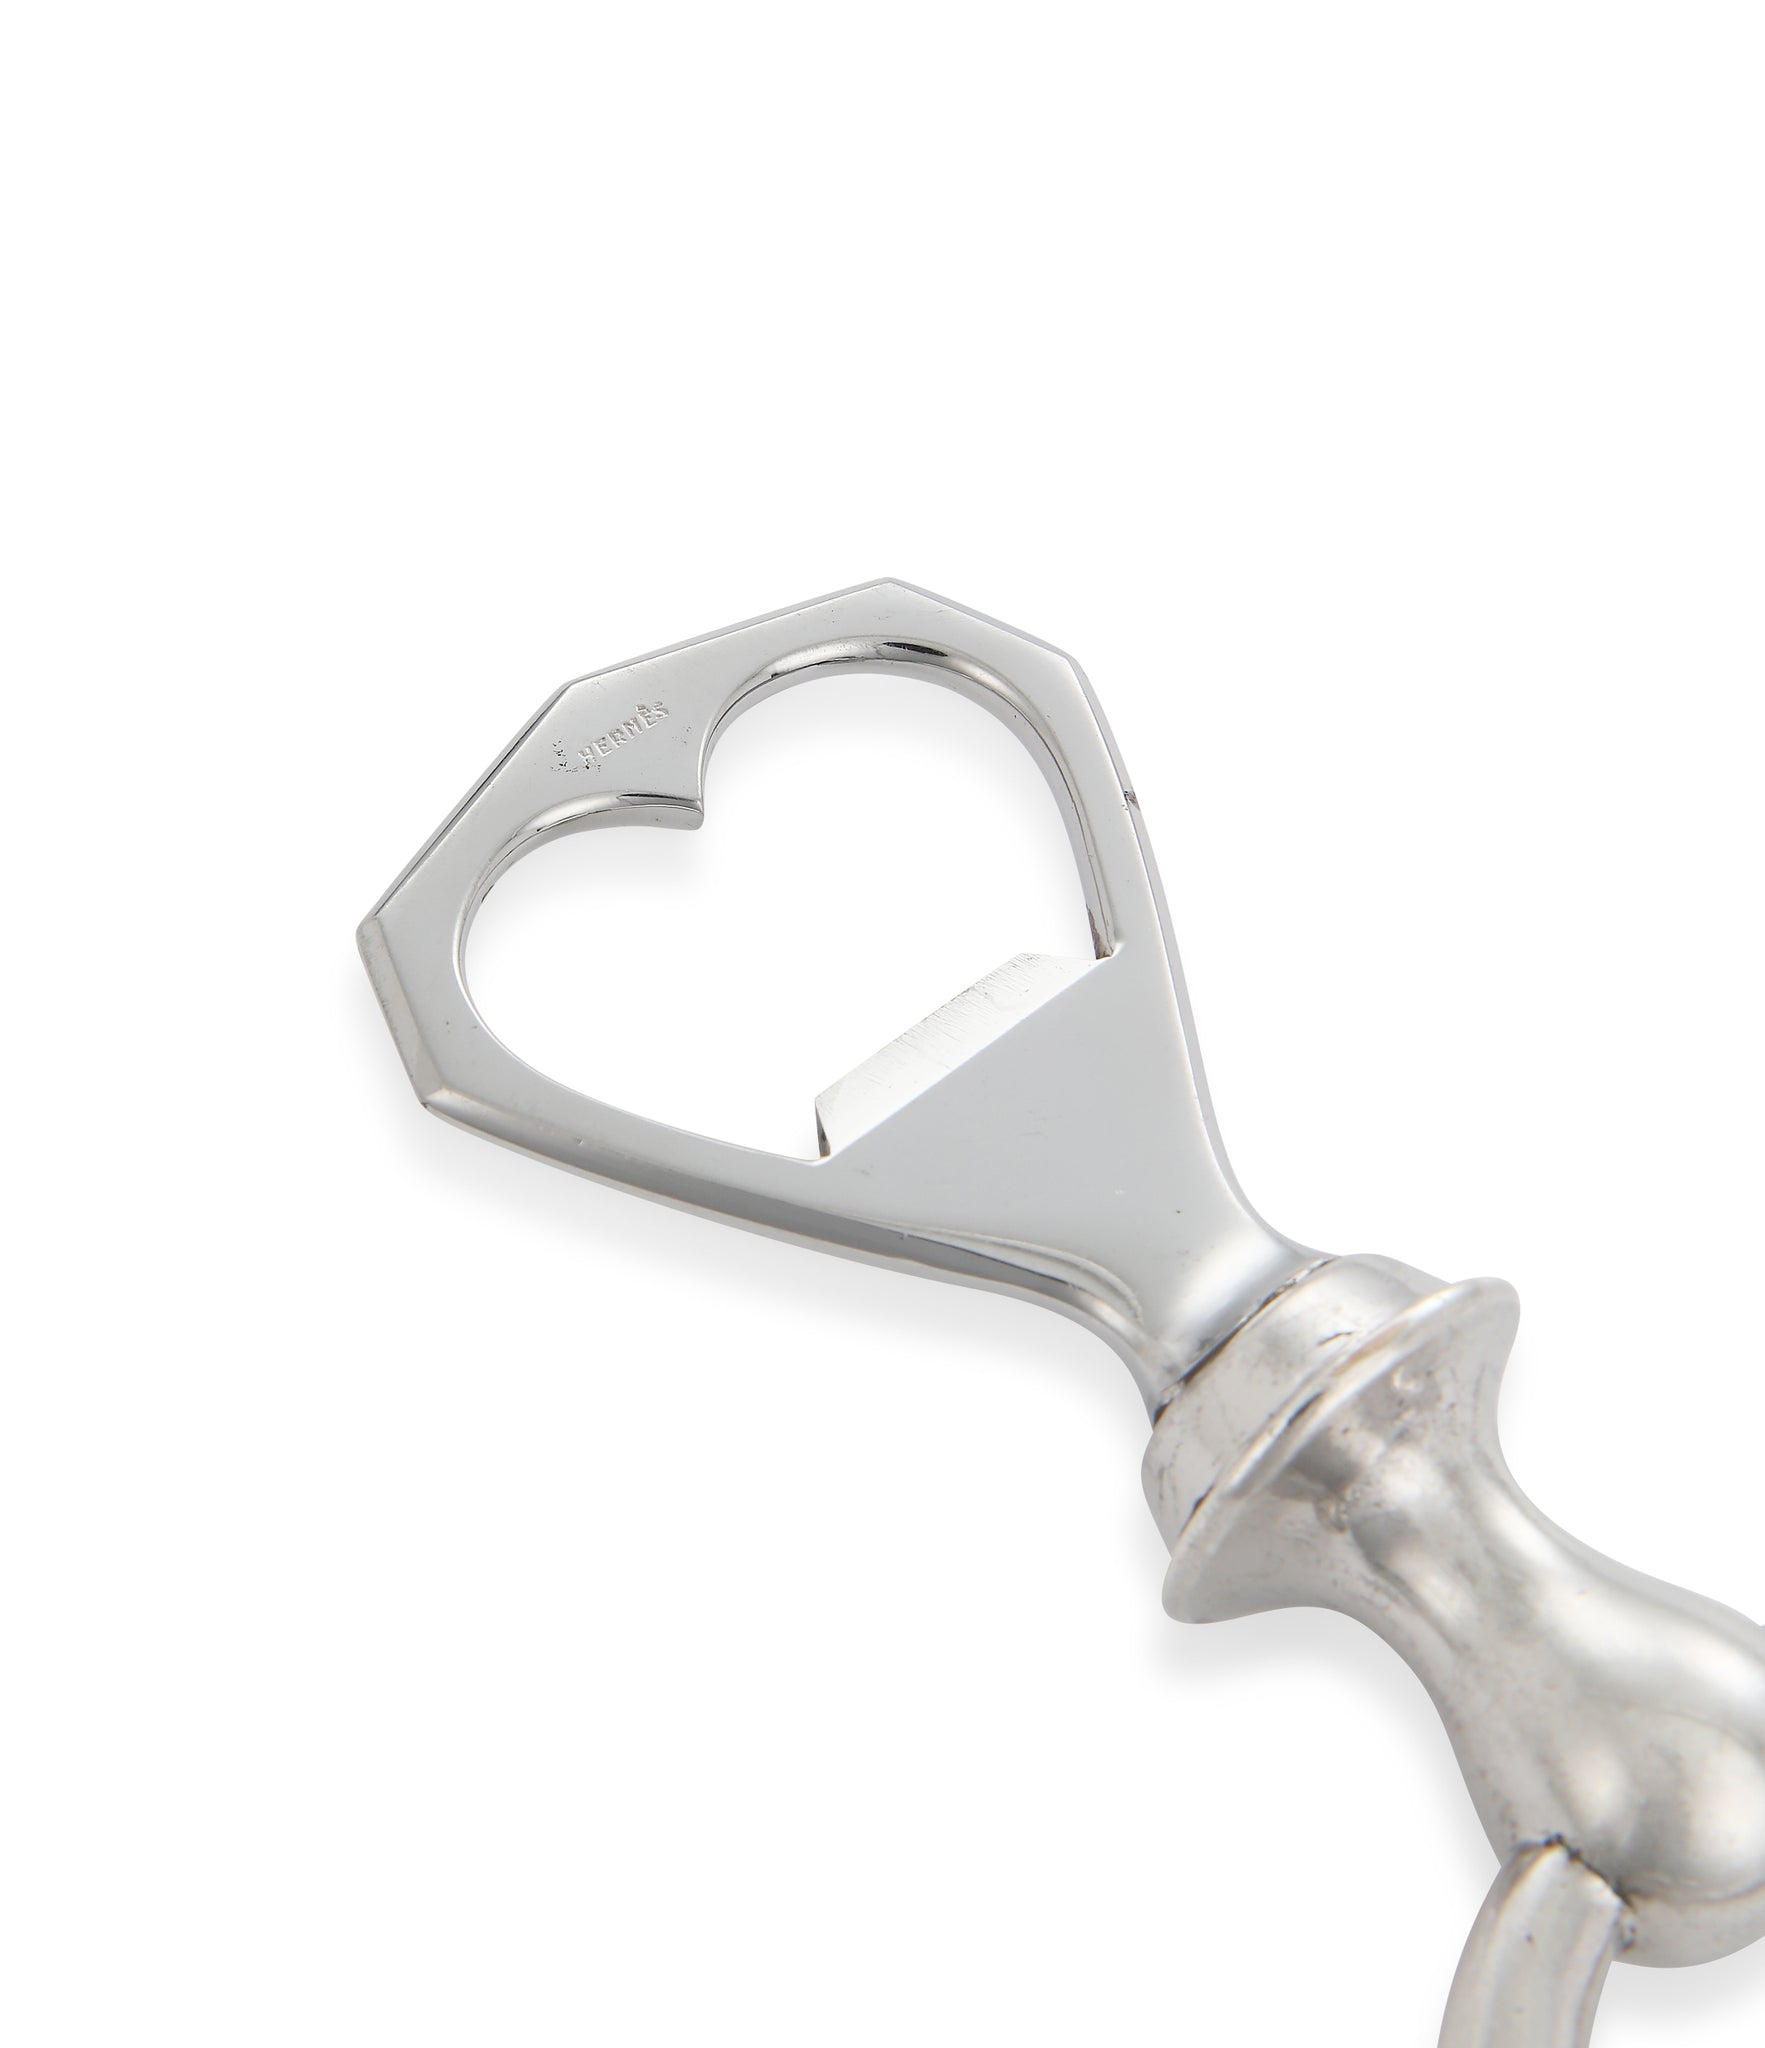 vintage Hermès Paris collectable bottle opener in silver tone at A Collected Man London